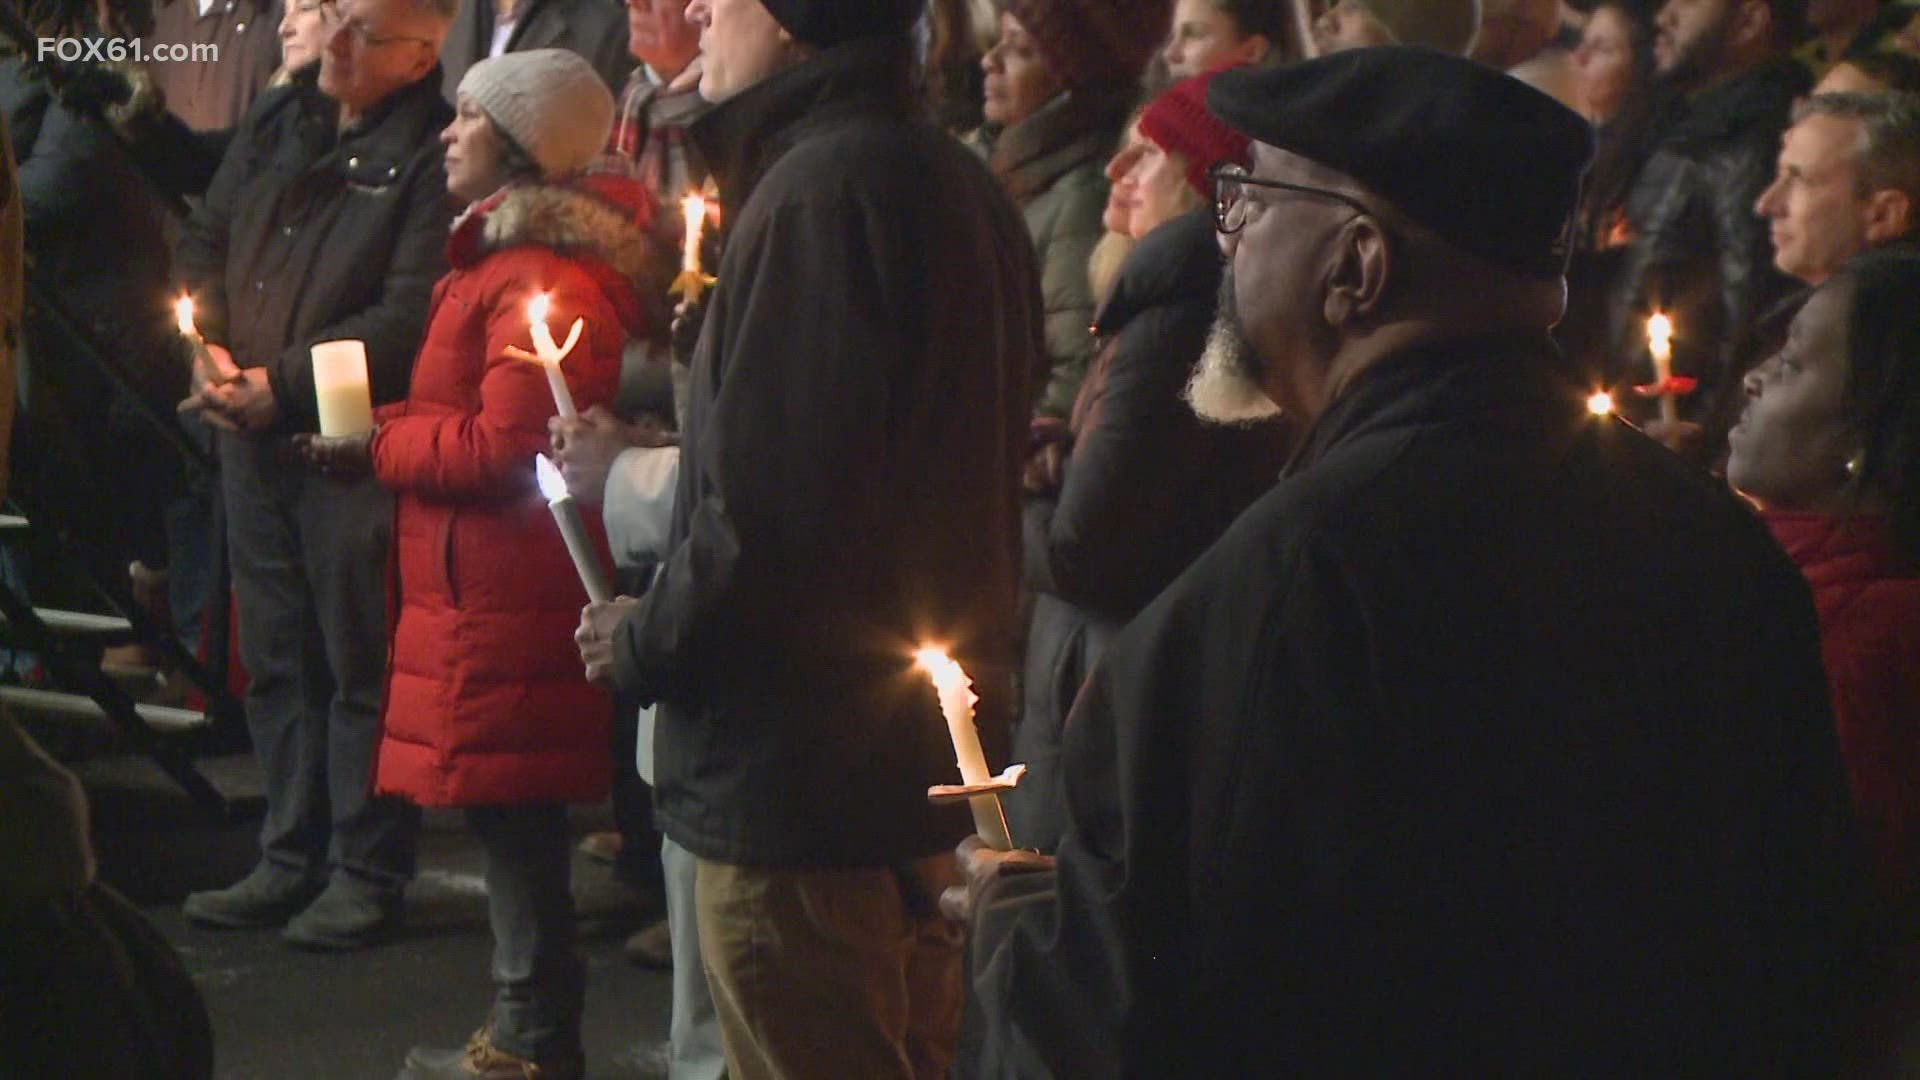 "Q’s light has not gone out, Q’s light will never go out," said Middletown Mayor Ben Florsheim.